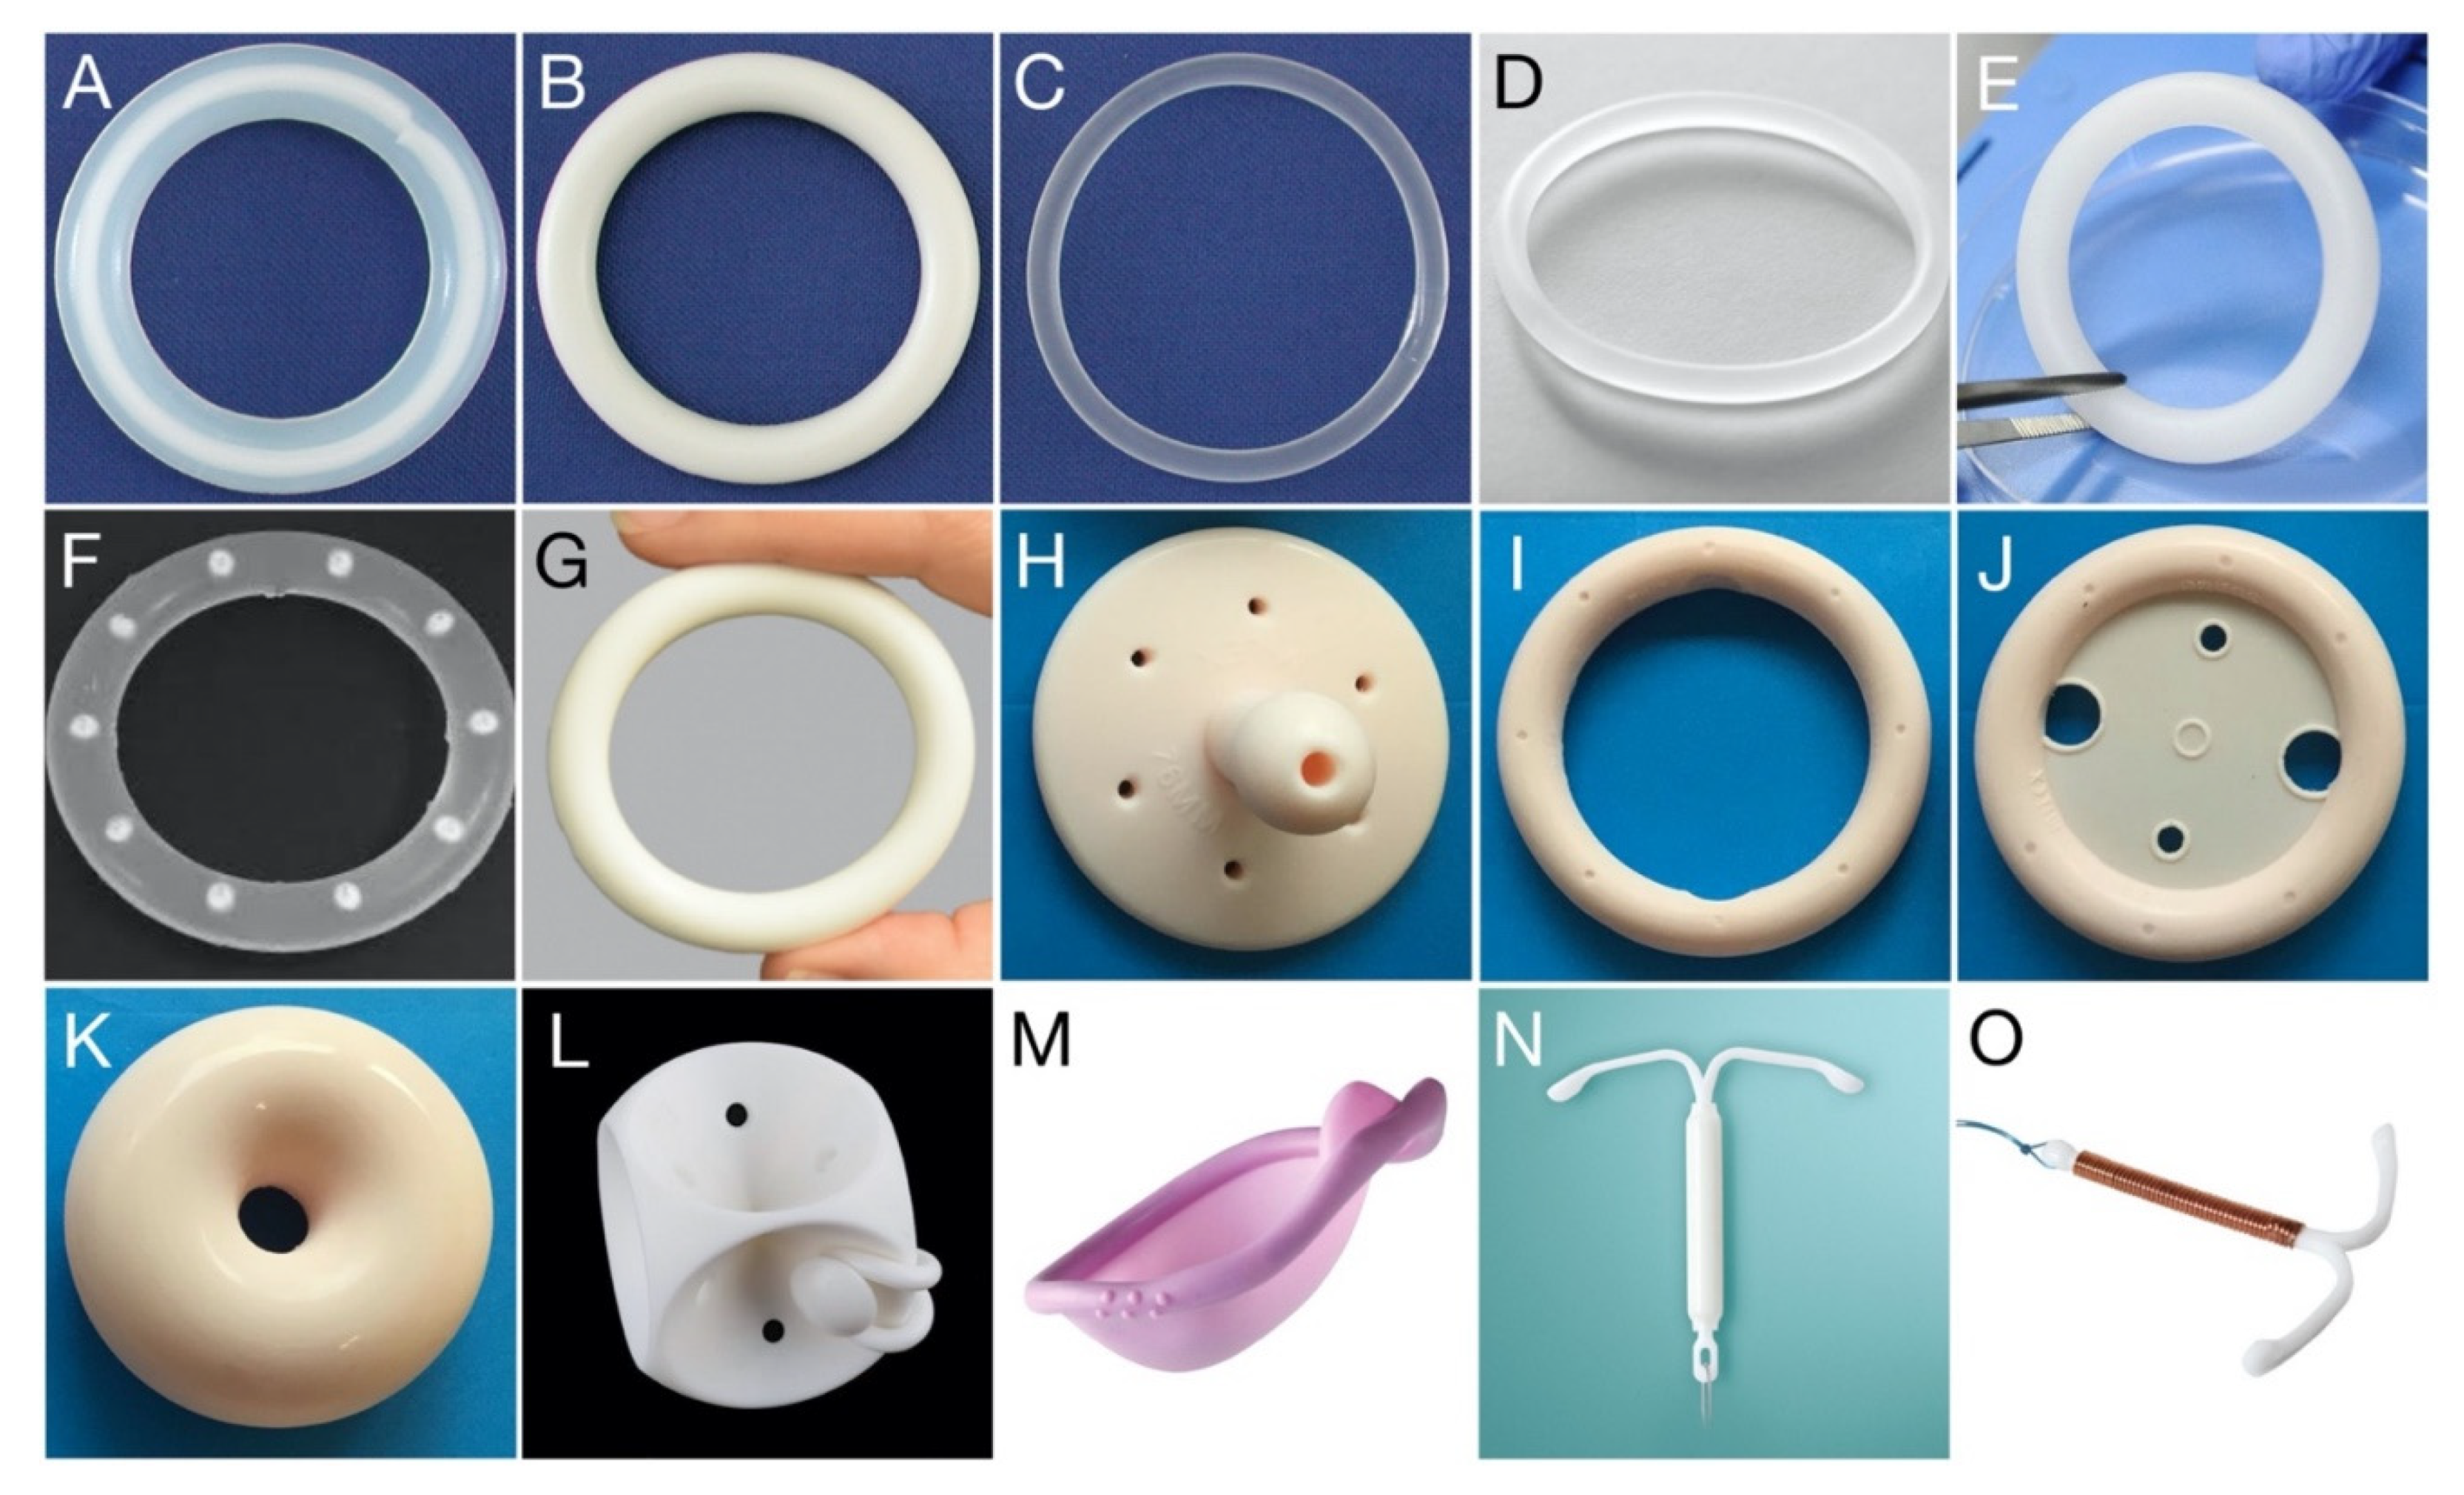 Vaginal Ring Holds Potential in Preventing HIV and Pregnancy